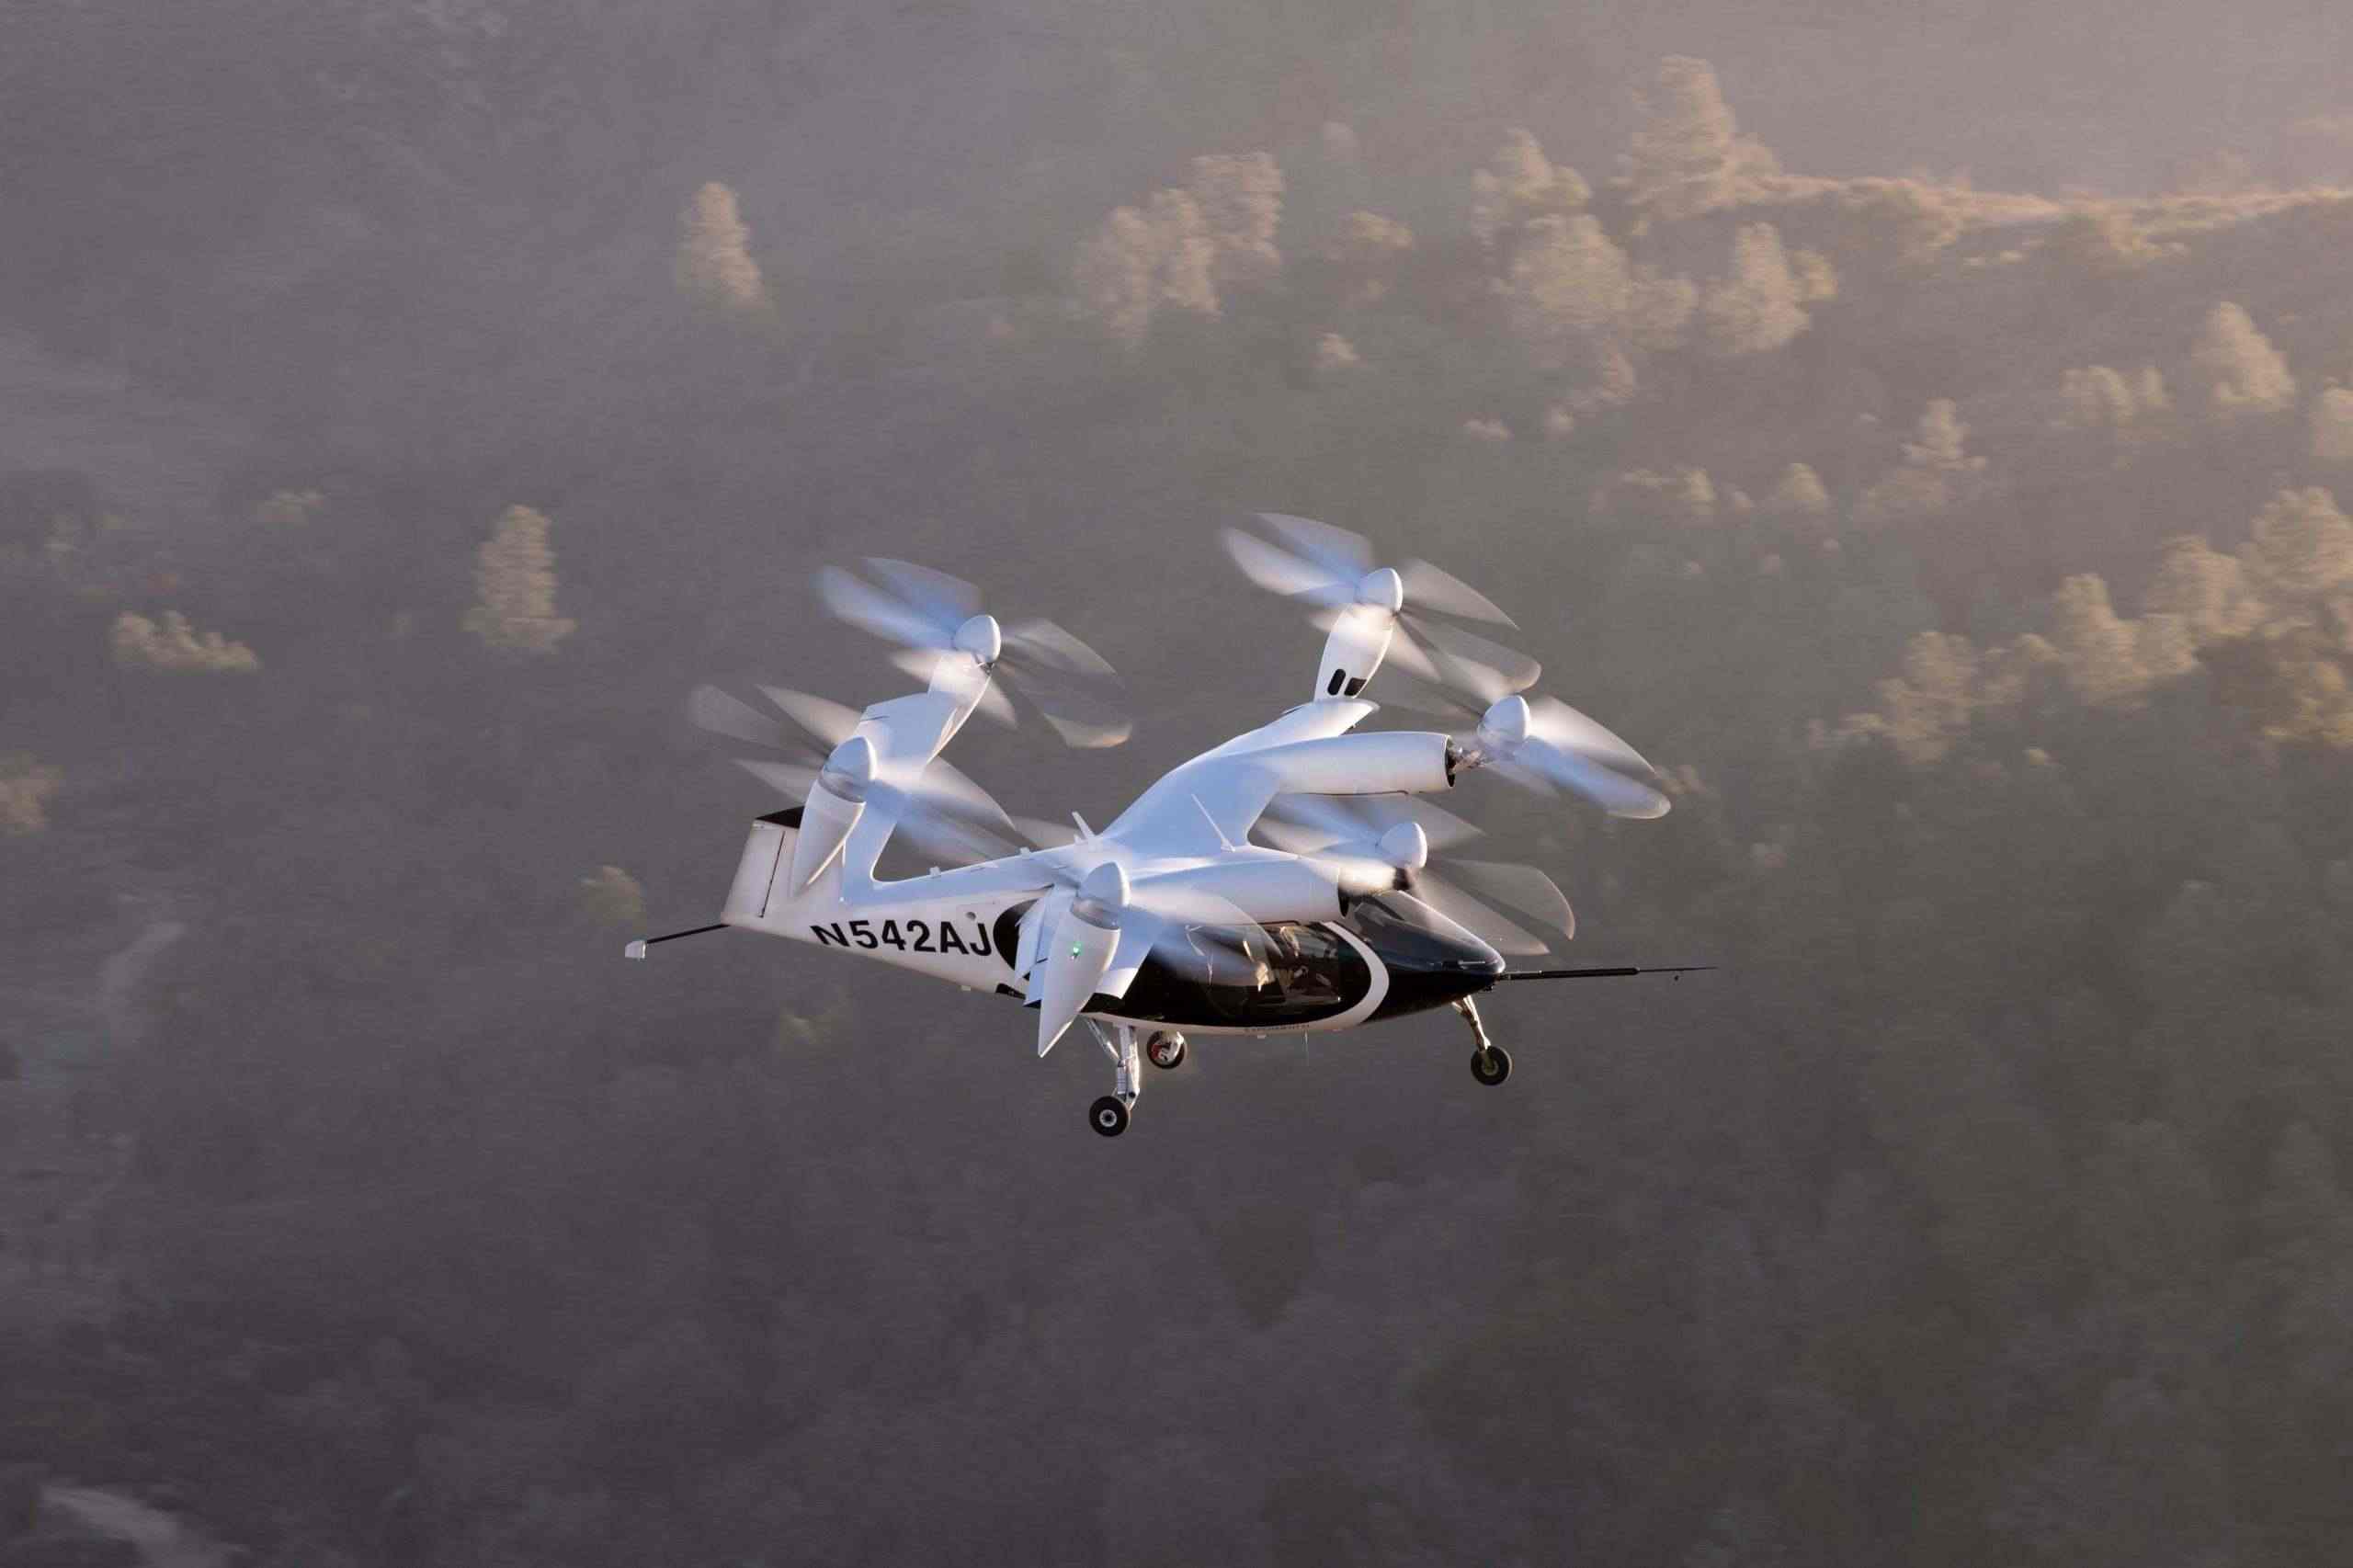 All-Electric, Vertical Take-Off And Landing (Evtol) Aircraft By Joby Aviation